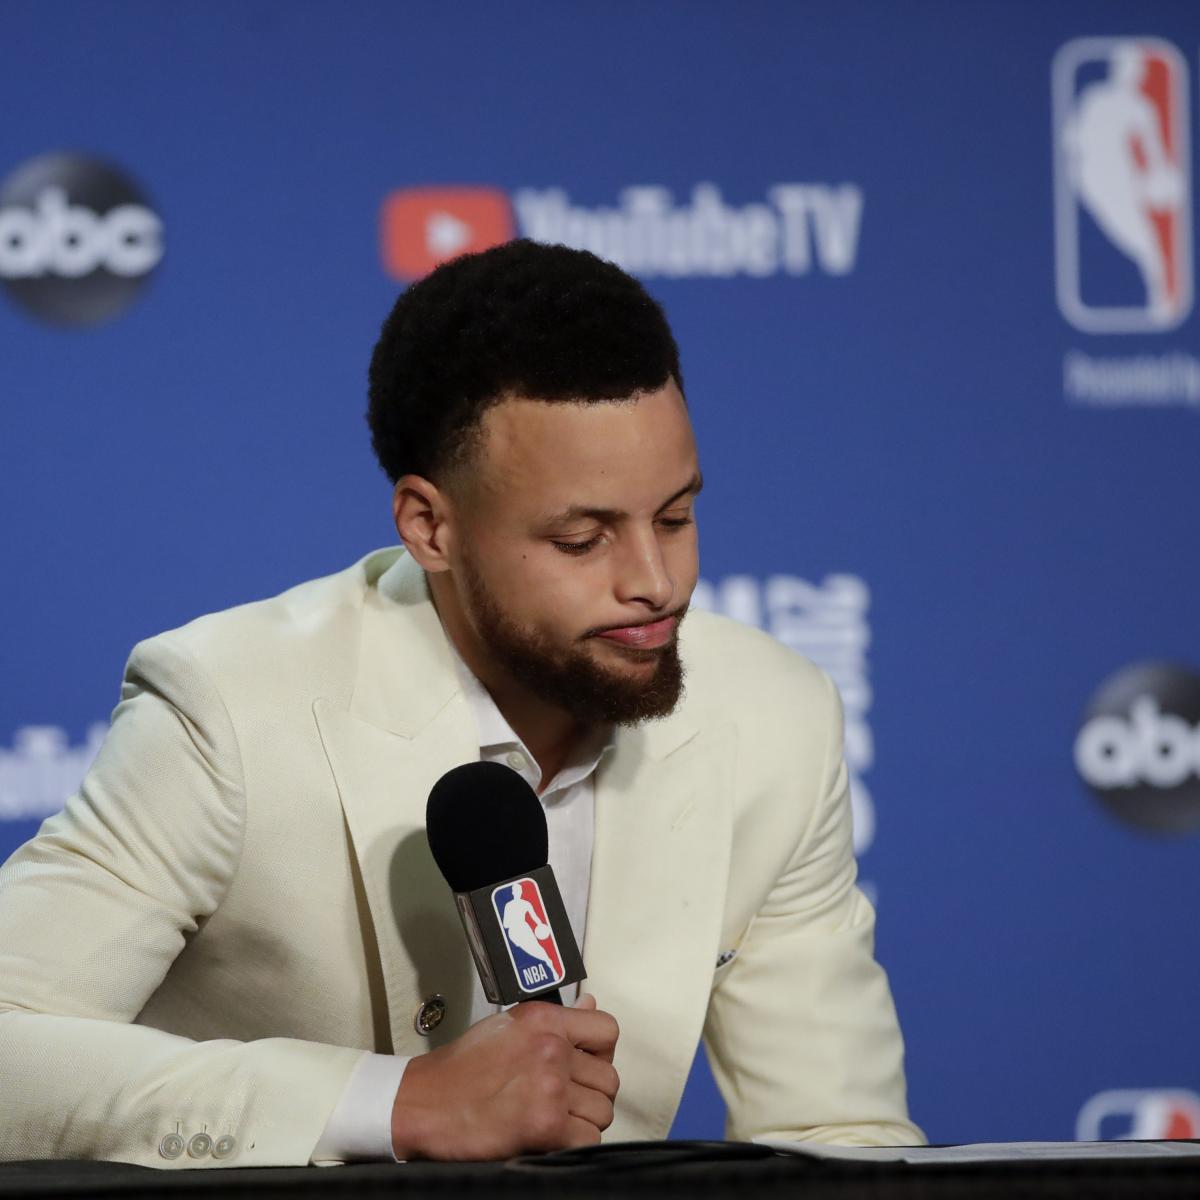 Video: Steph Curry Shows Massive Muscle Contraction After Finals Loss to Raptors